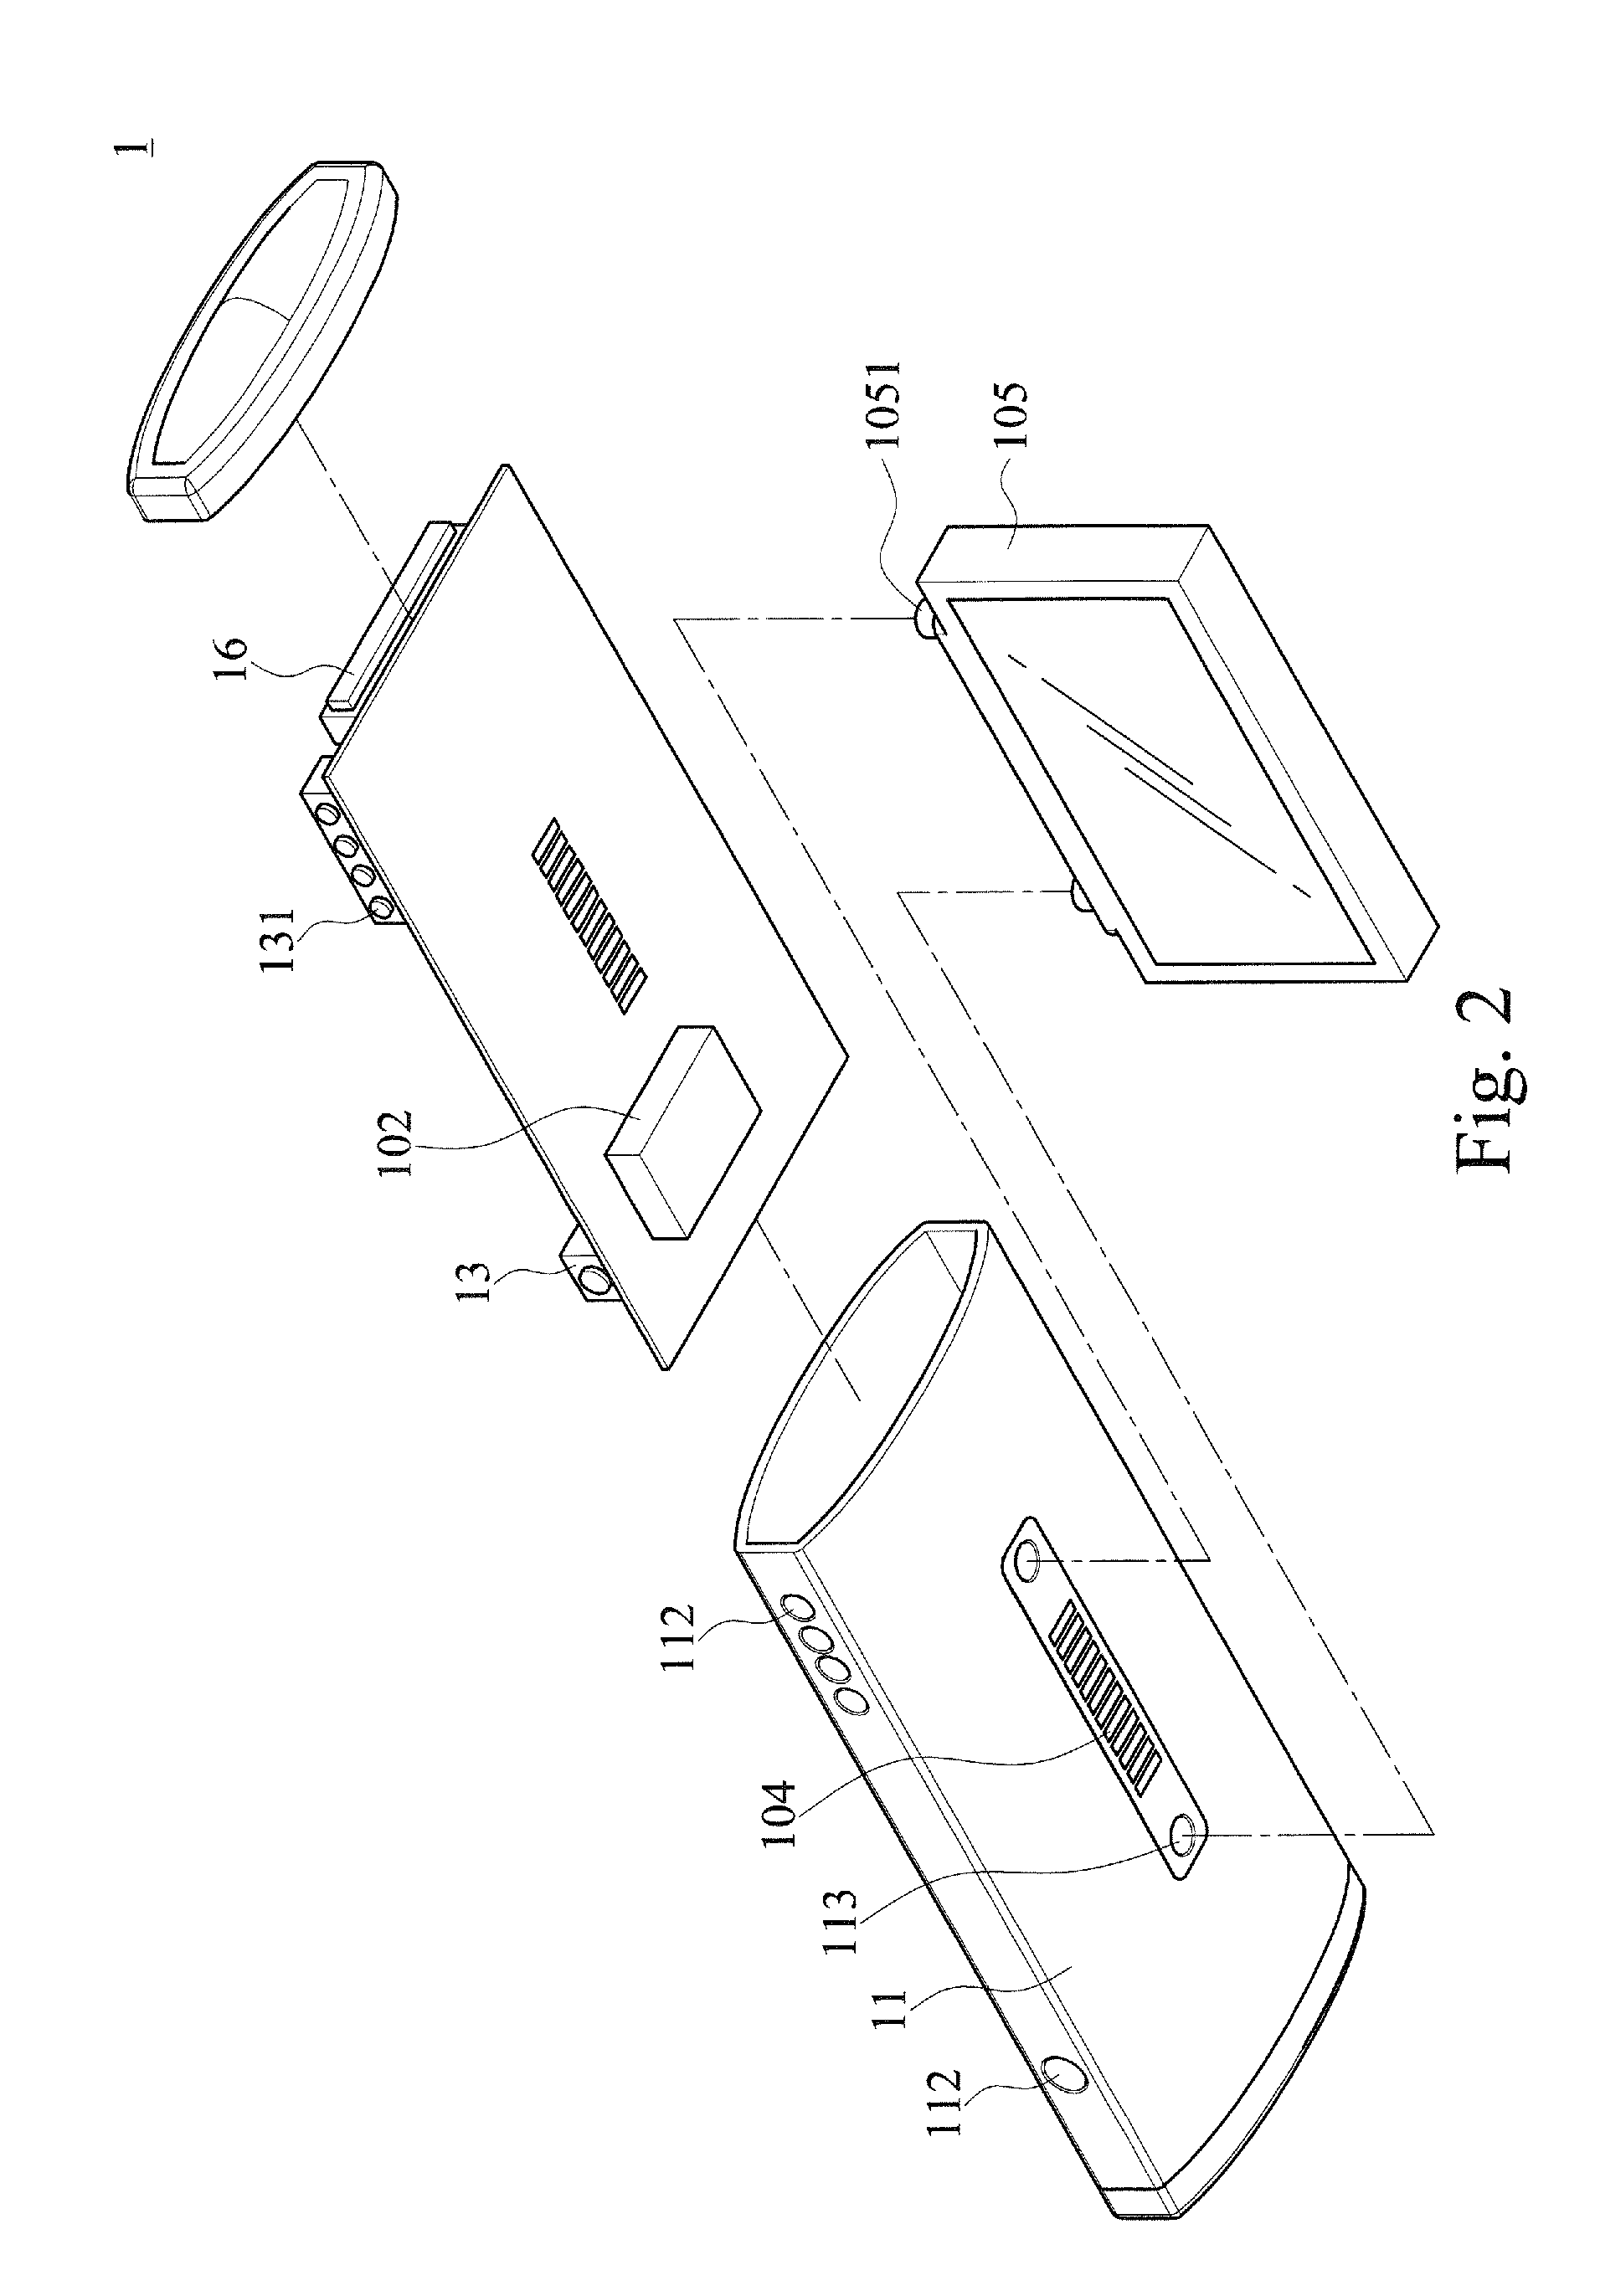 Real-time mobile video reporting device